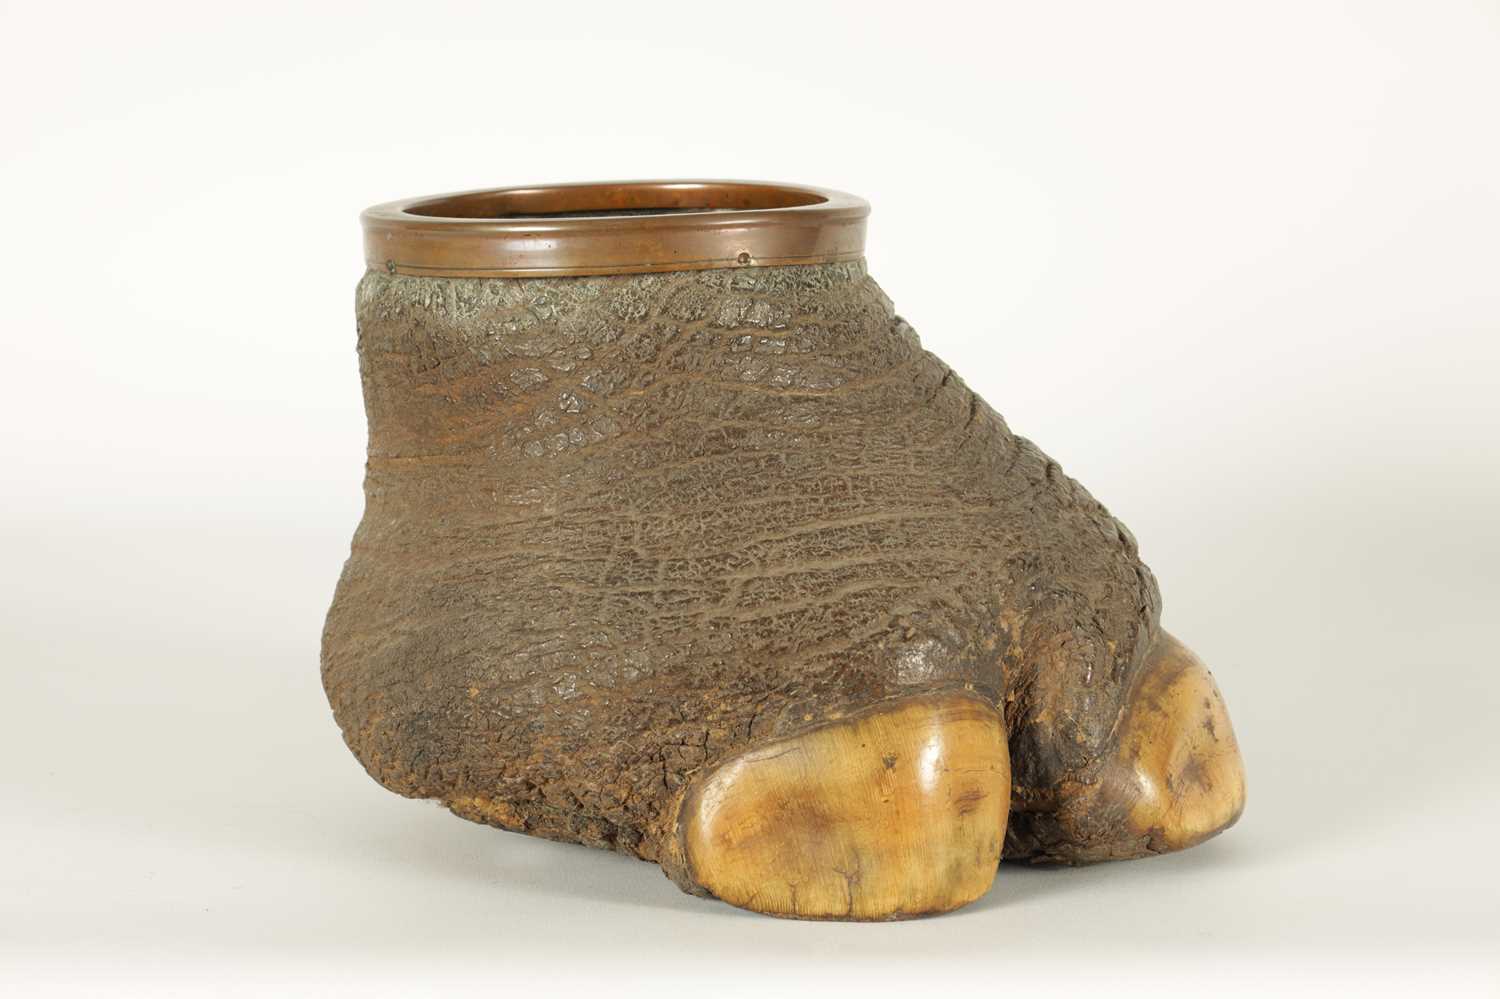 A SMALL LATE 19TH CENTURY TAXIDERMY RHINO FOOT - Image 7 of 8